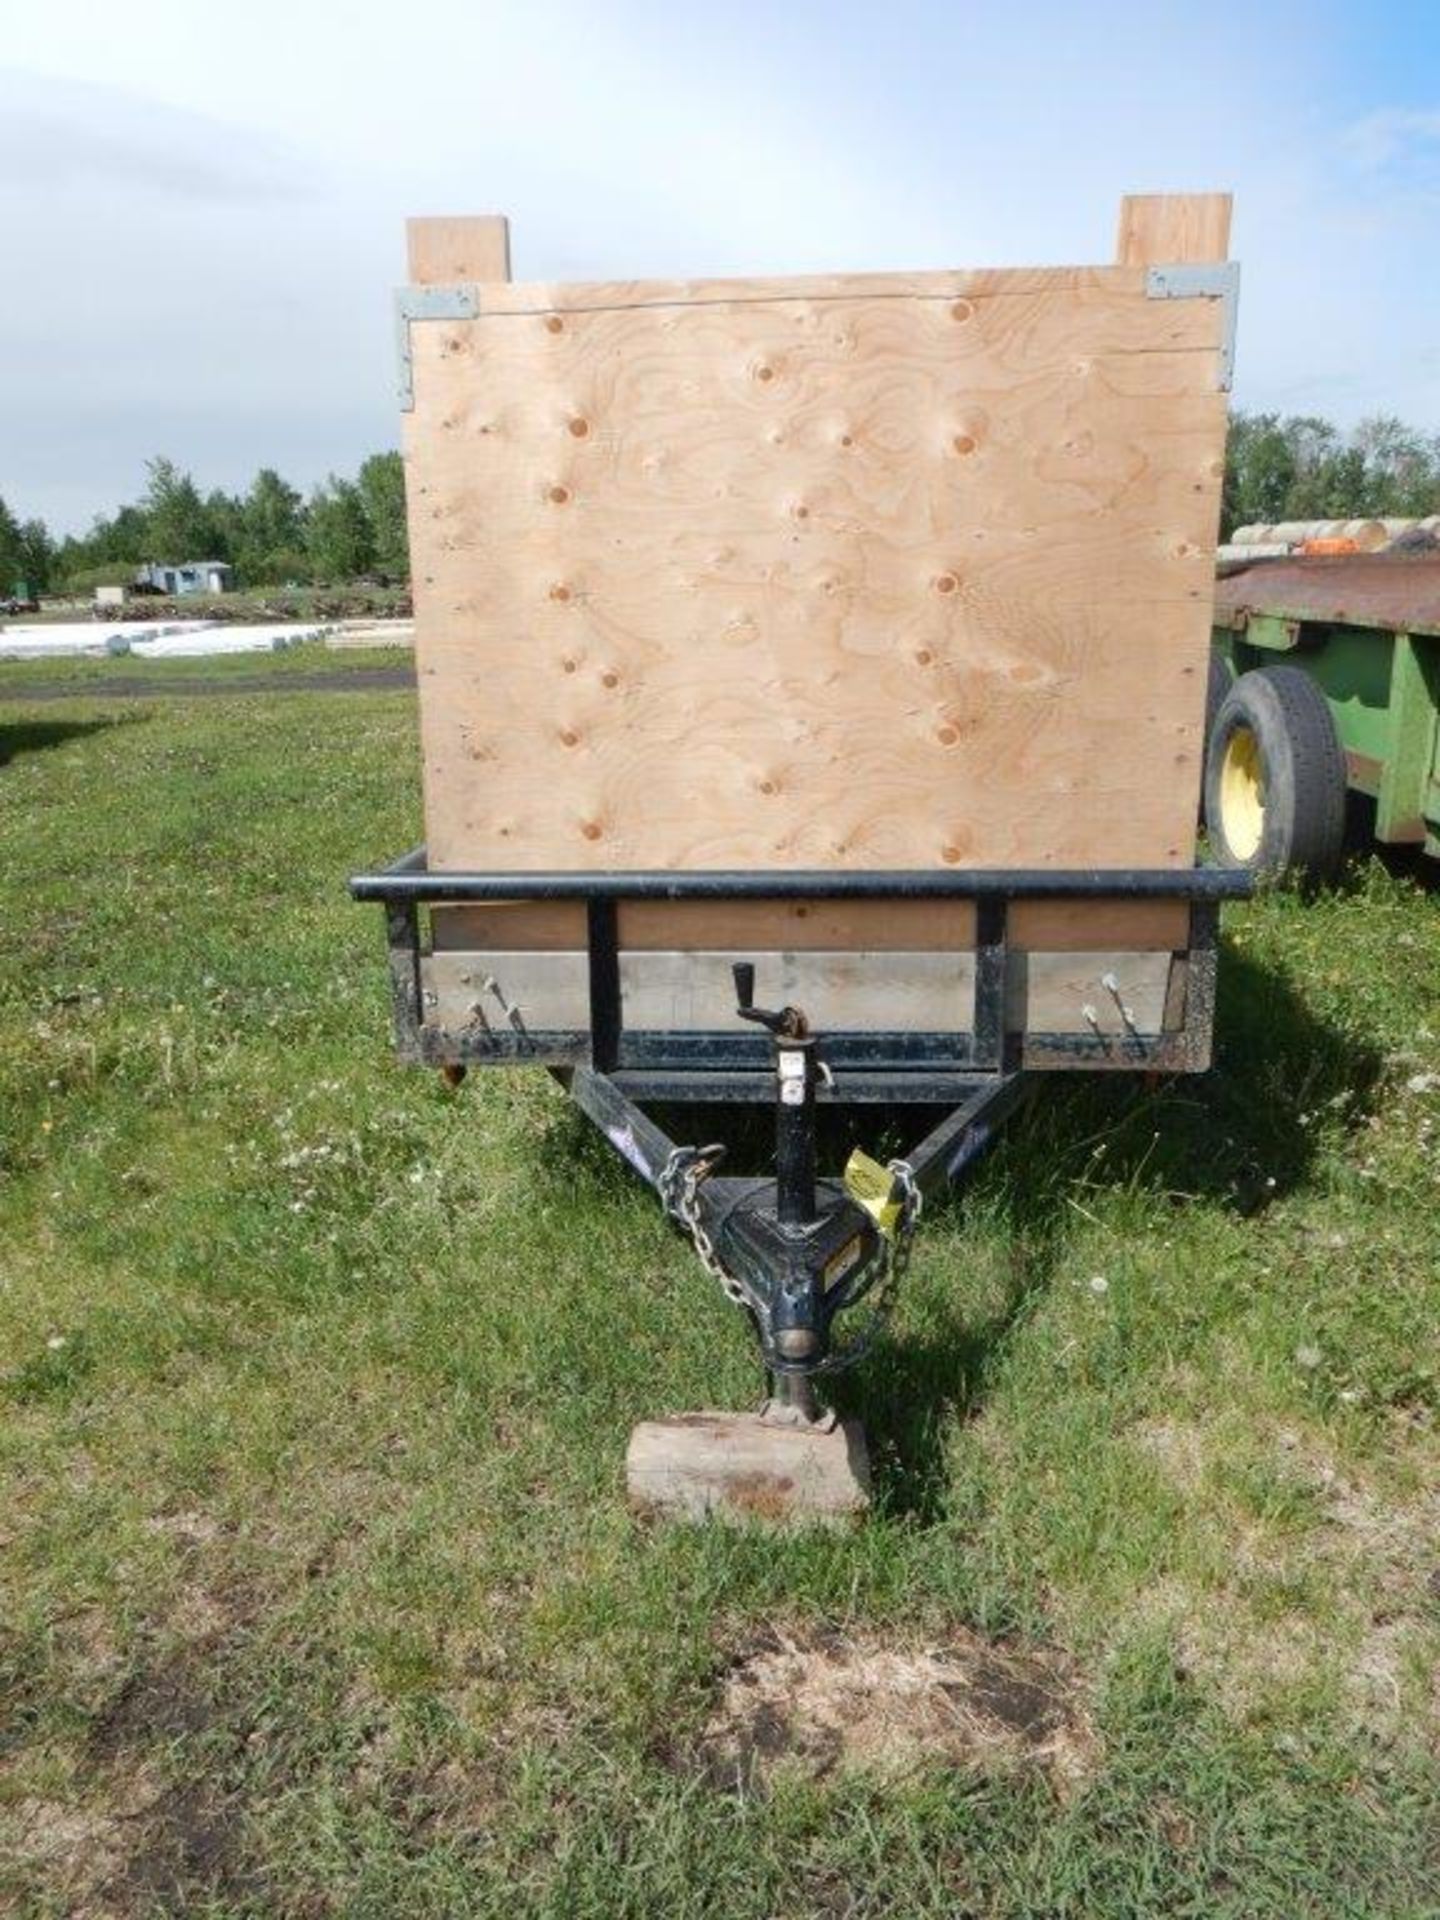 2006 DIAMOND C TRAILERS 10 FT S/A UTILITY TRAILER MODEL 10TRA/REM S/N 46UFU101161105315 - Image 6 of 6